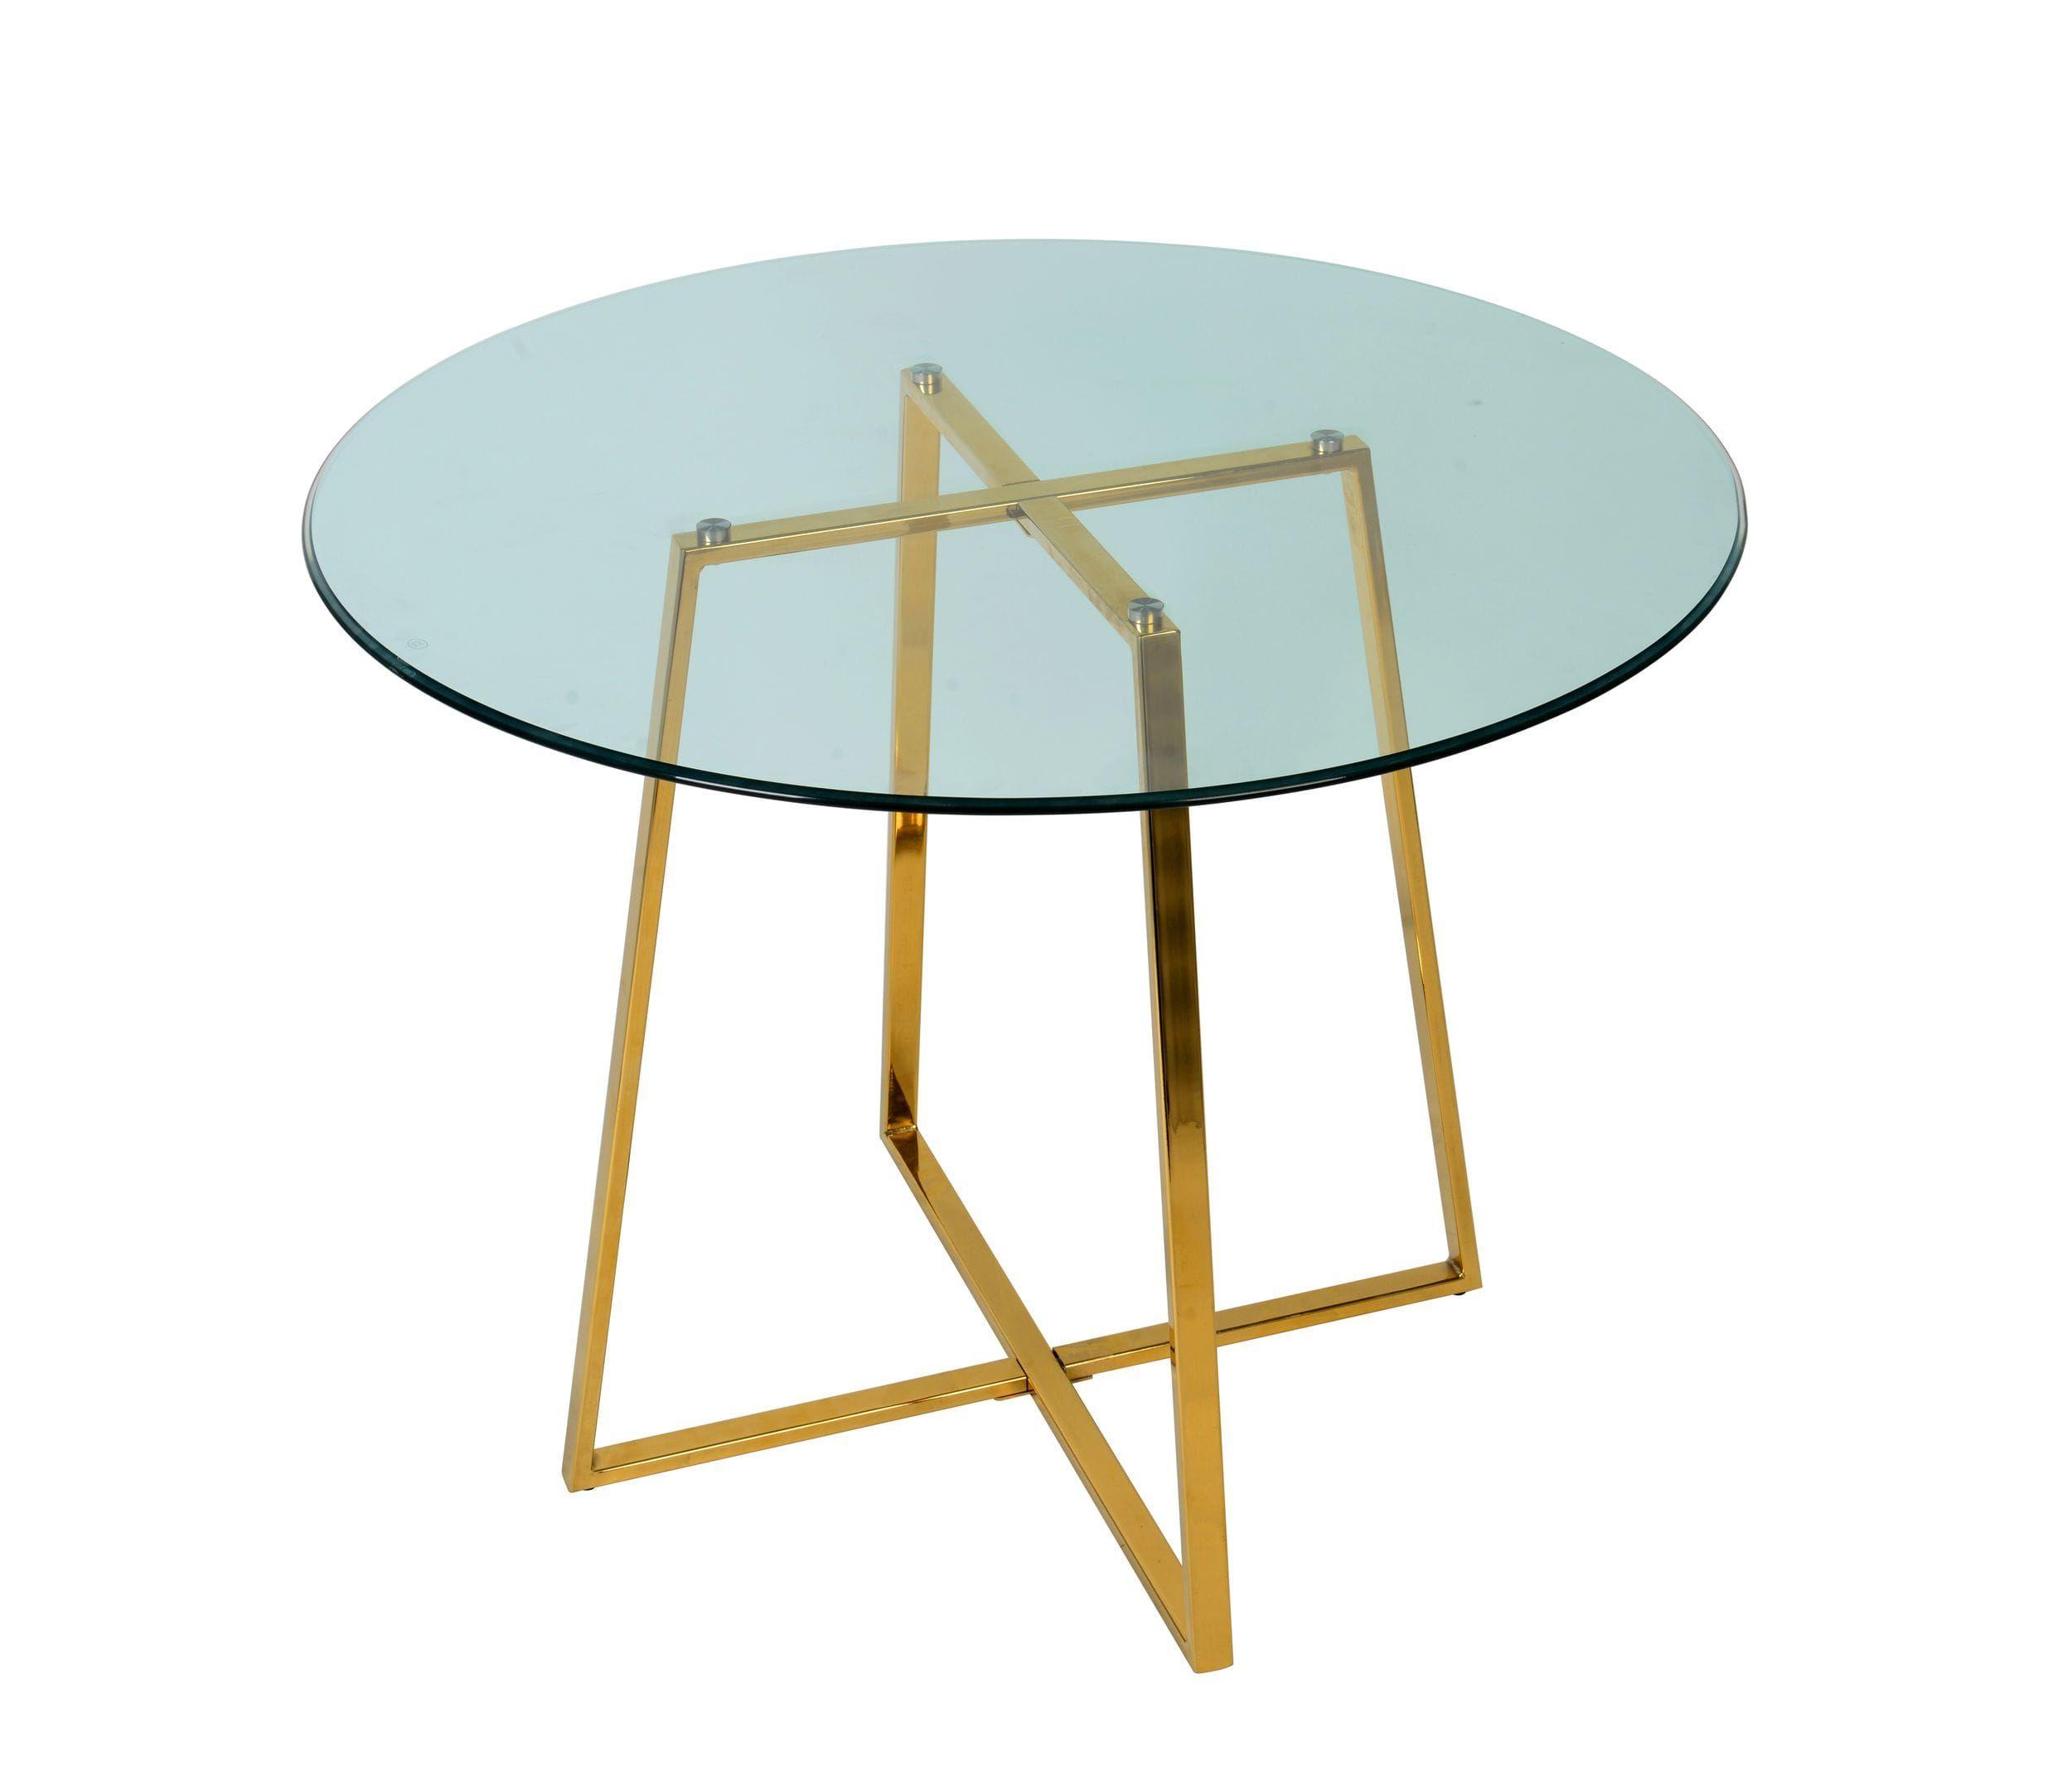 Contemporary, Modern Dining Table Swain VGFHFDT8004-GLS in White, Gold 